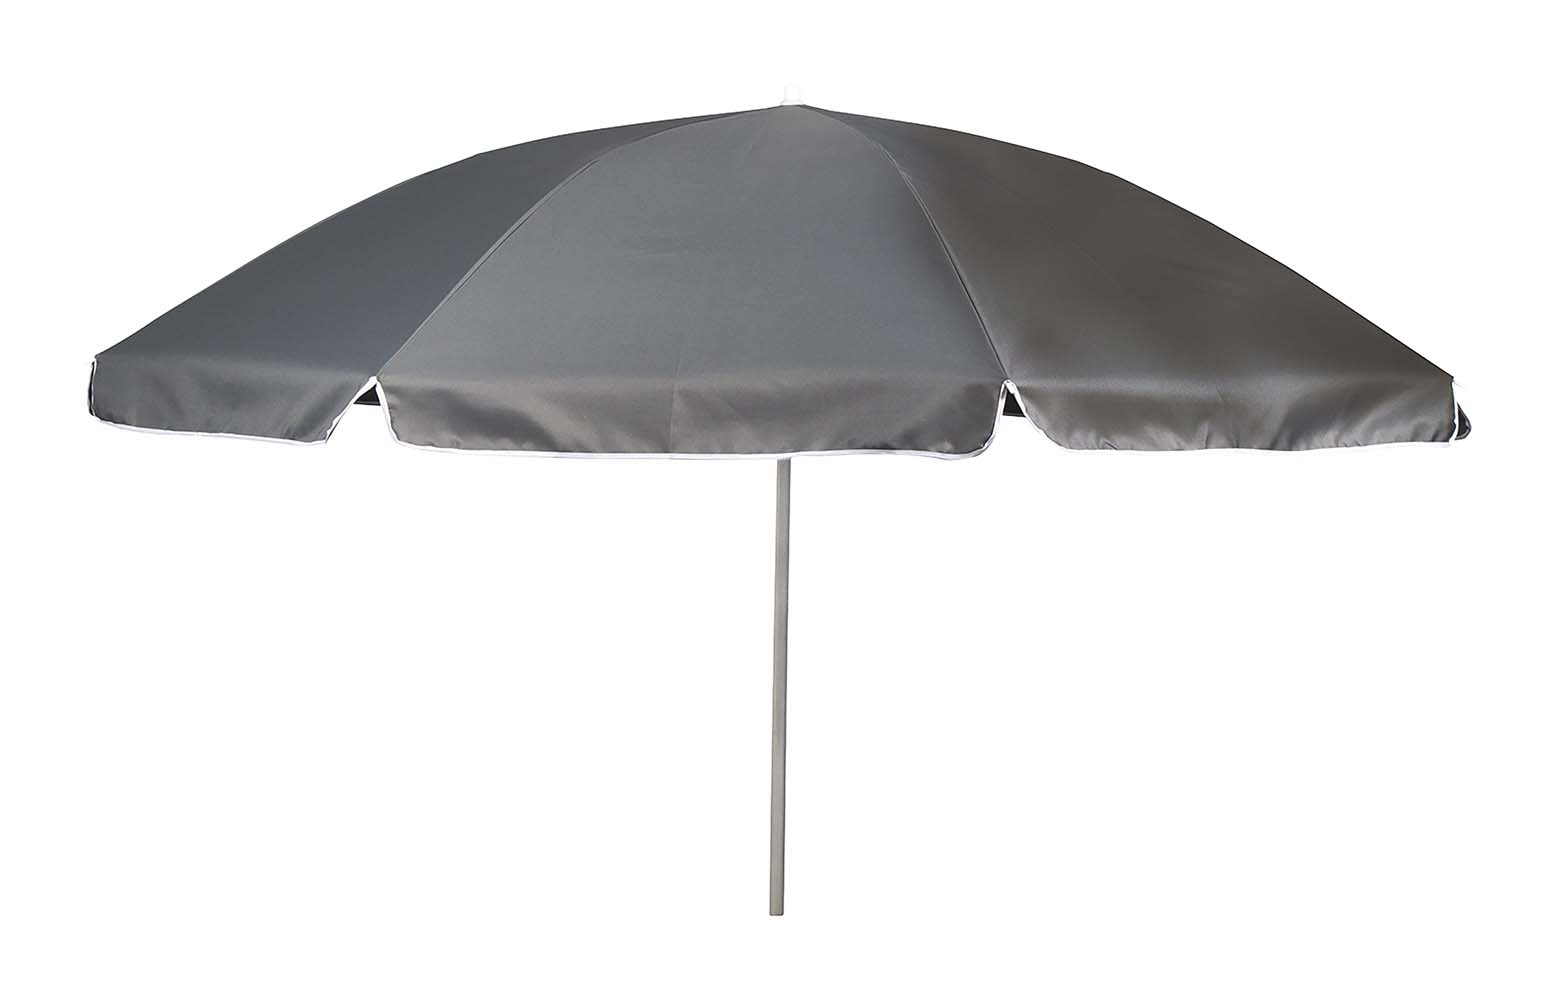 7267247 A stylish and sturdy steel frame parasol. The 160 gr/m² polyester fabric provides protection against harmful solar radiation. The pole has an articulated arm to allow the parasol to bend depending on the direction of the sun. The parasol pole has a 25 mm diameter.